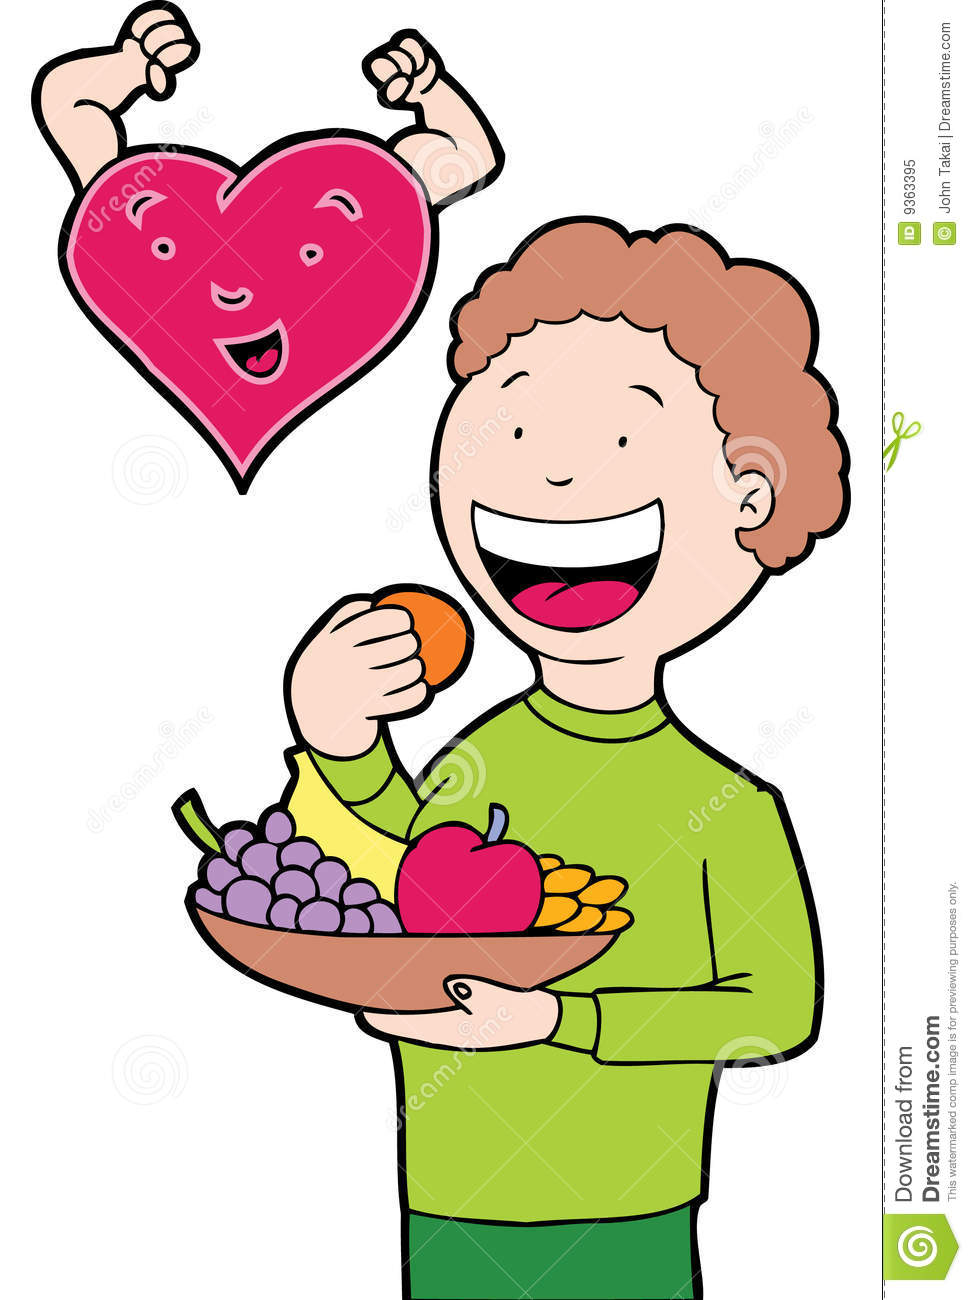 Kids Eating Healthy Clipart.